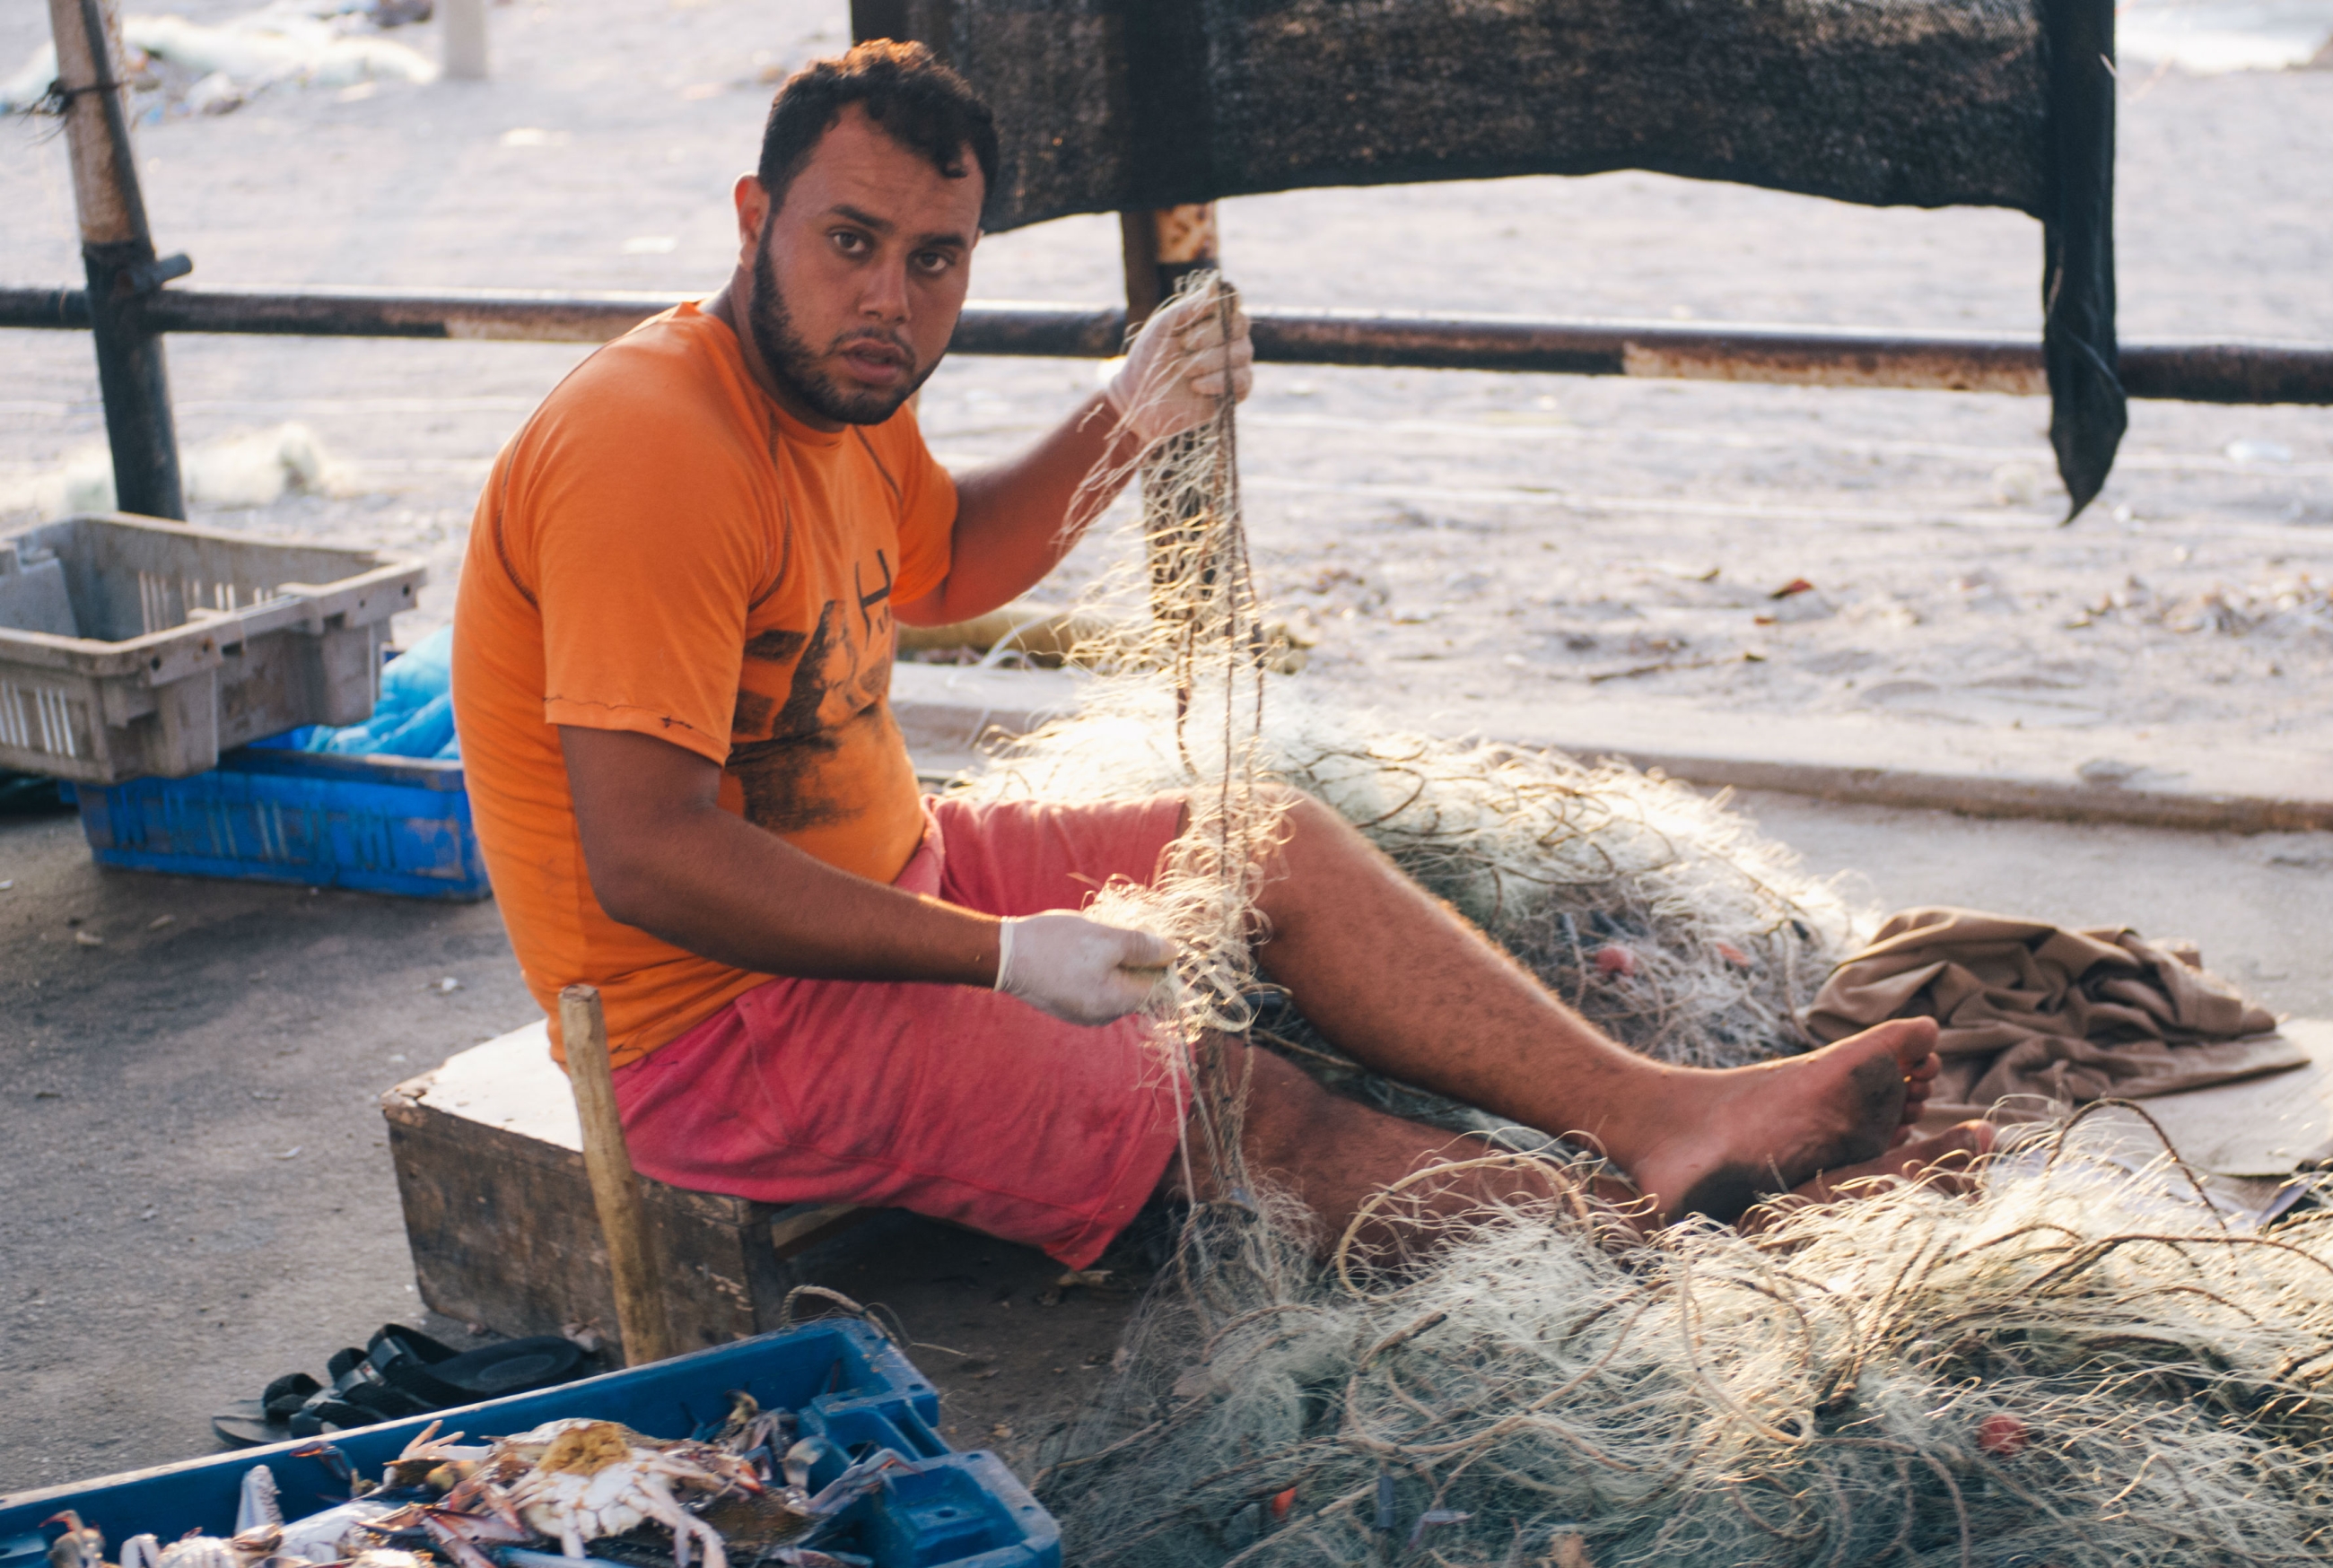 Gaza's connection to the sea may be the strongest in the Shati refugee camp, named after the coast on which it sits. Everywhere there are fishermen, either preparing to go out to sea or else returning with hauls that they sell on the roadside while they fix their nets